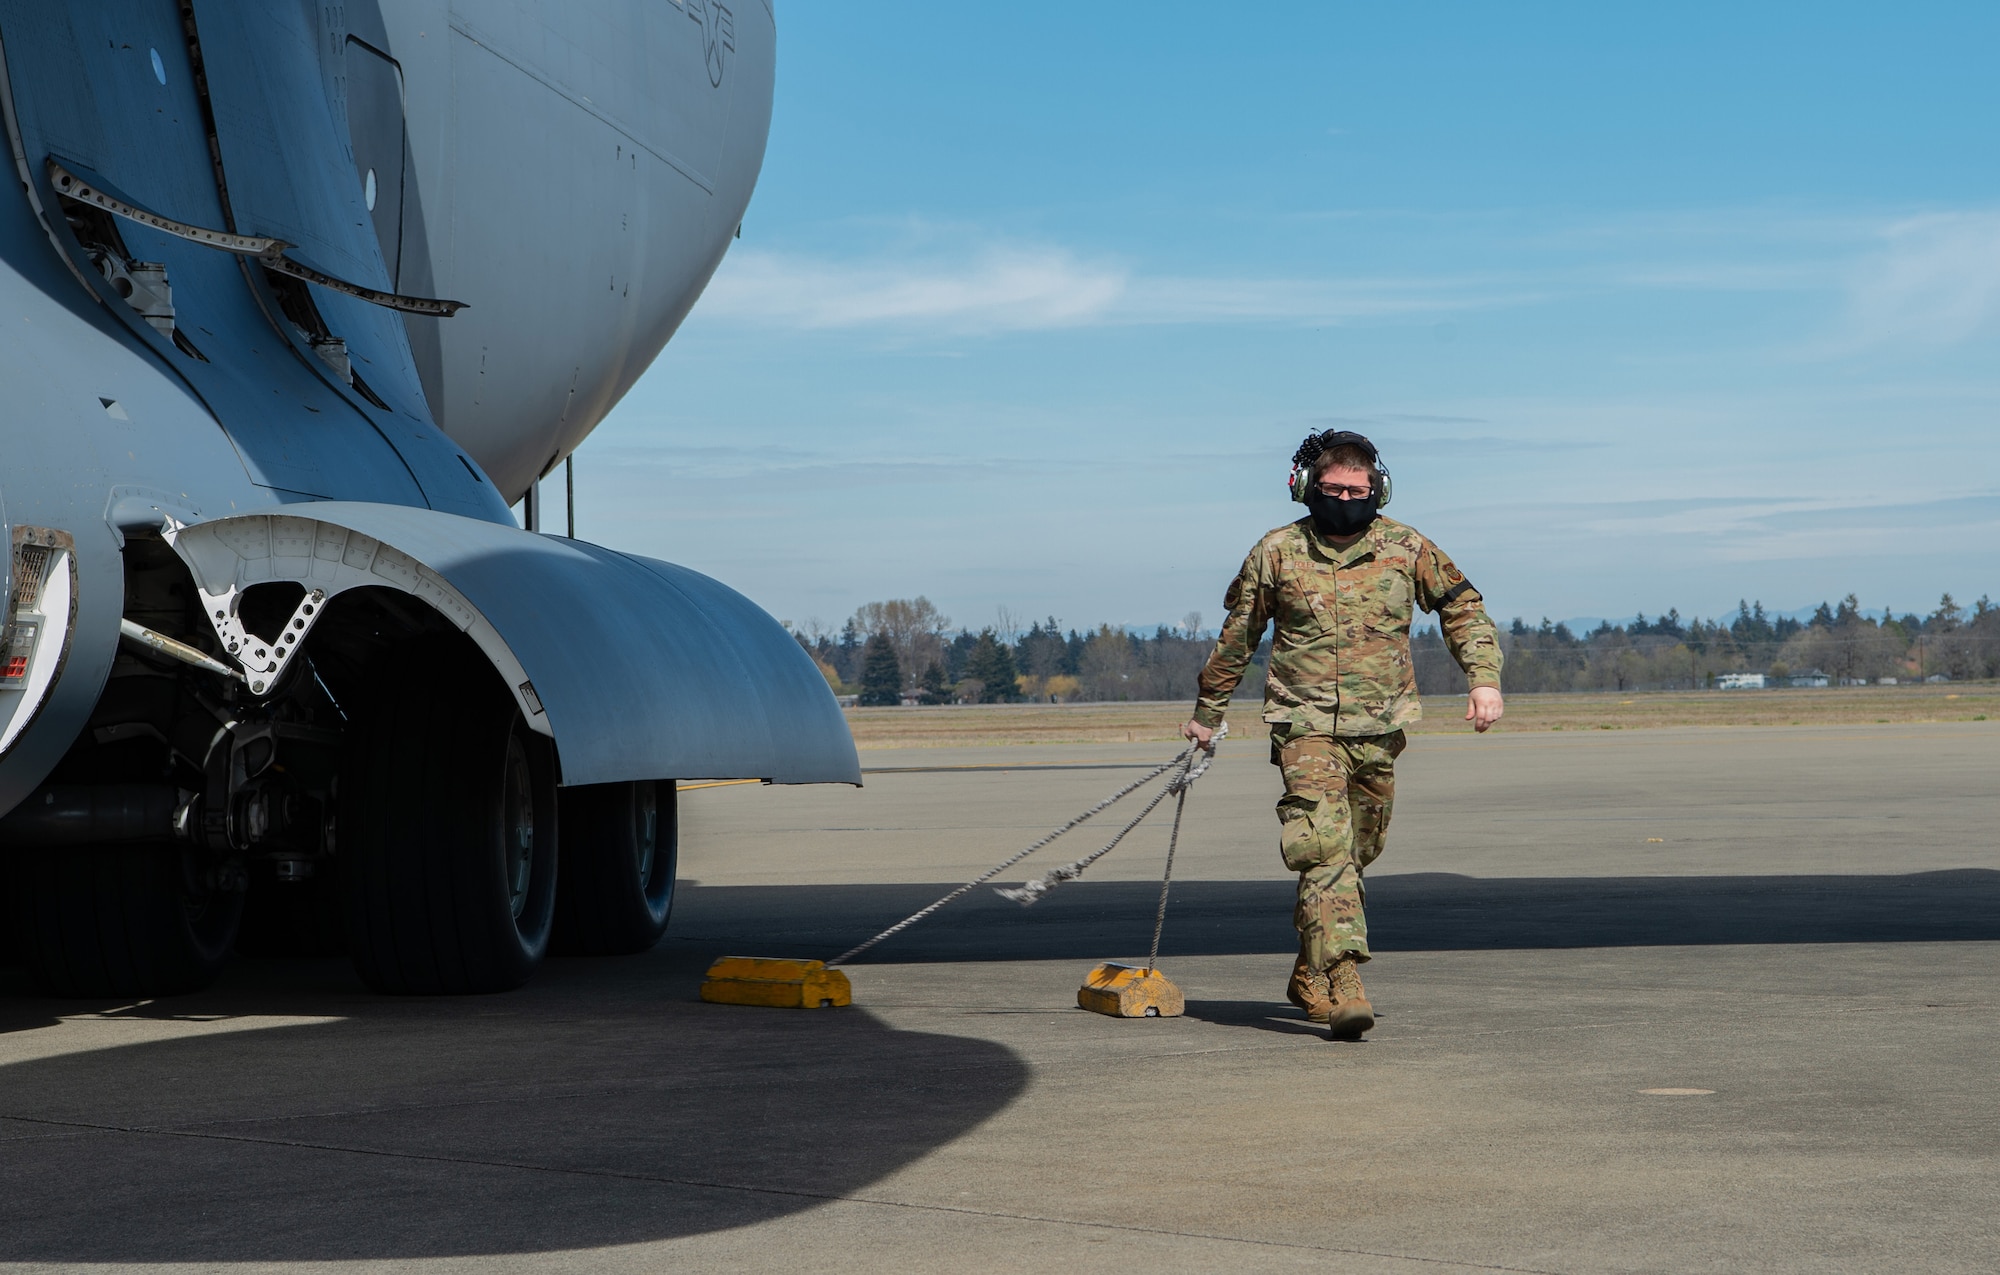 Staff Sgt. Bertrand Foley, 62nd Aircraft Maintenance Squadron communication, navigation and mission systems craftsman, removes the chalks from a C-17 Globemaster III at Joint Base Lewis-McChord, Wash., April 14, 2020. Aircrews are still flying missions during the COVID-19 pandemic, which means maintenance Airmen are critical in keeping aircraft in the air. (U.S. Air Force photo by Senior Airman Tryphena Mayhugh)